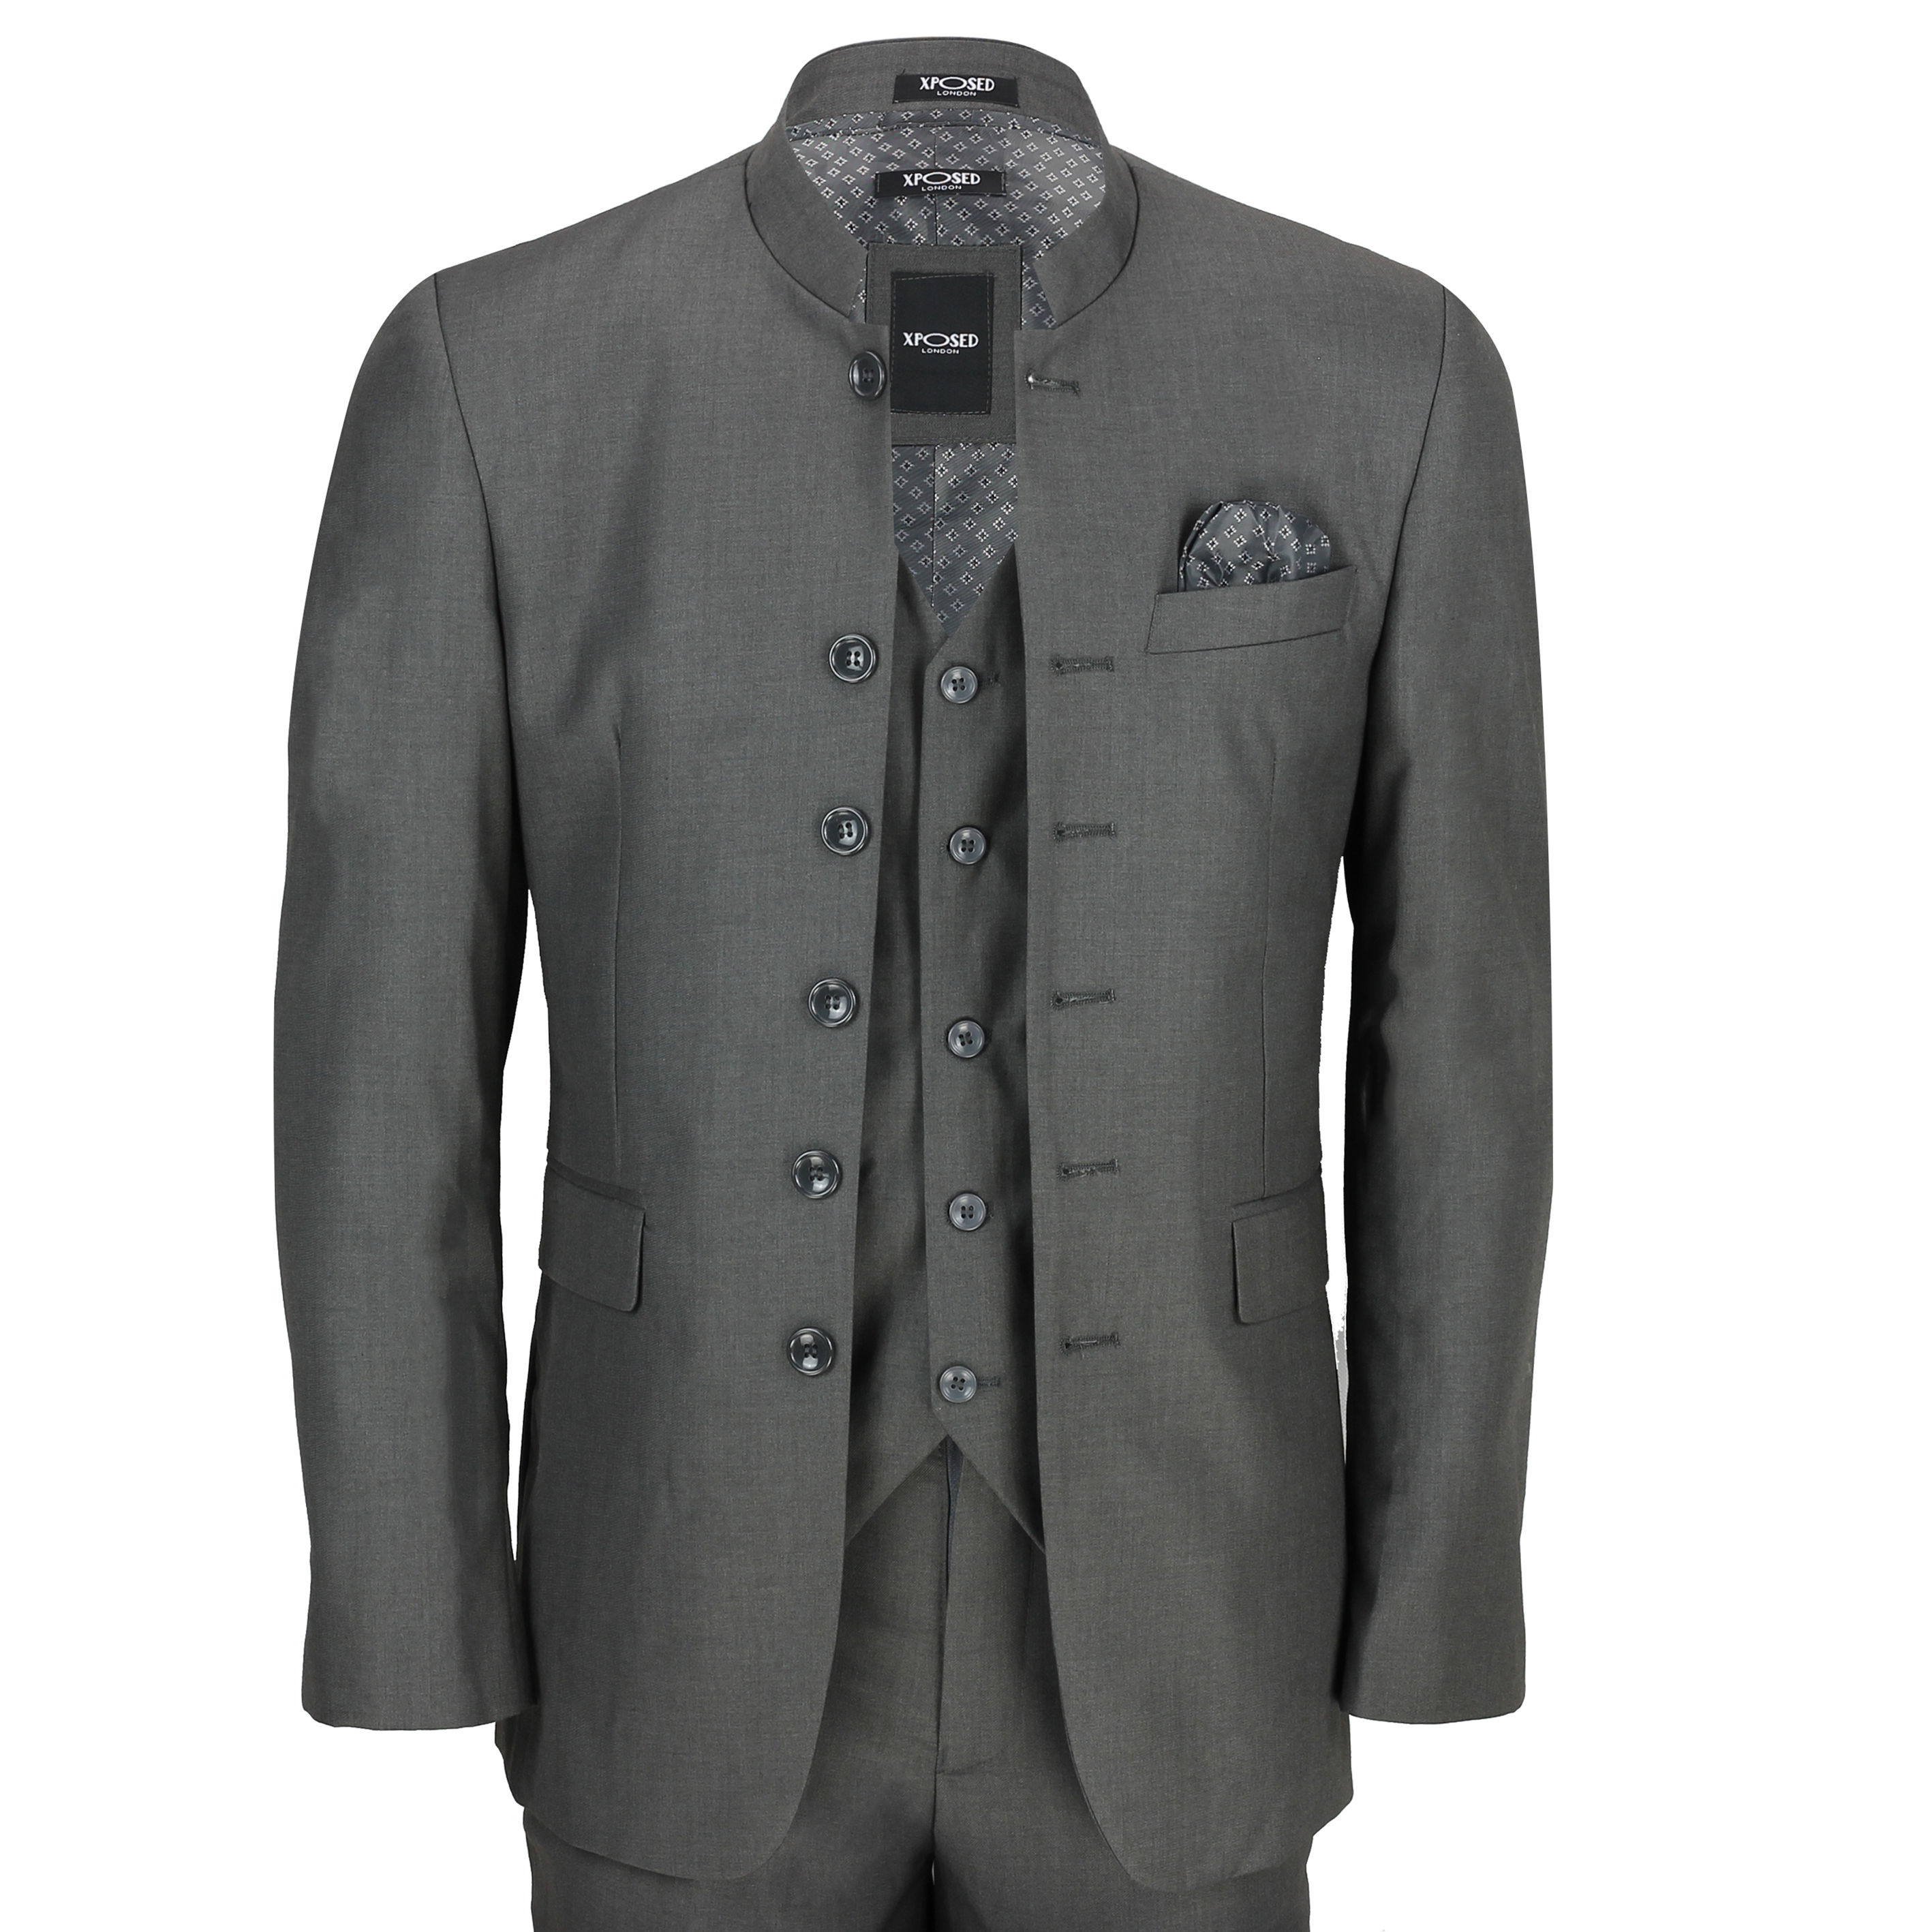 chinese collar suit for wedding